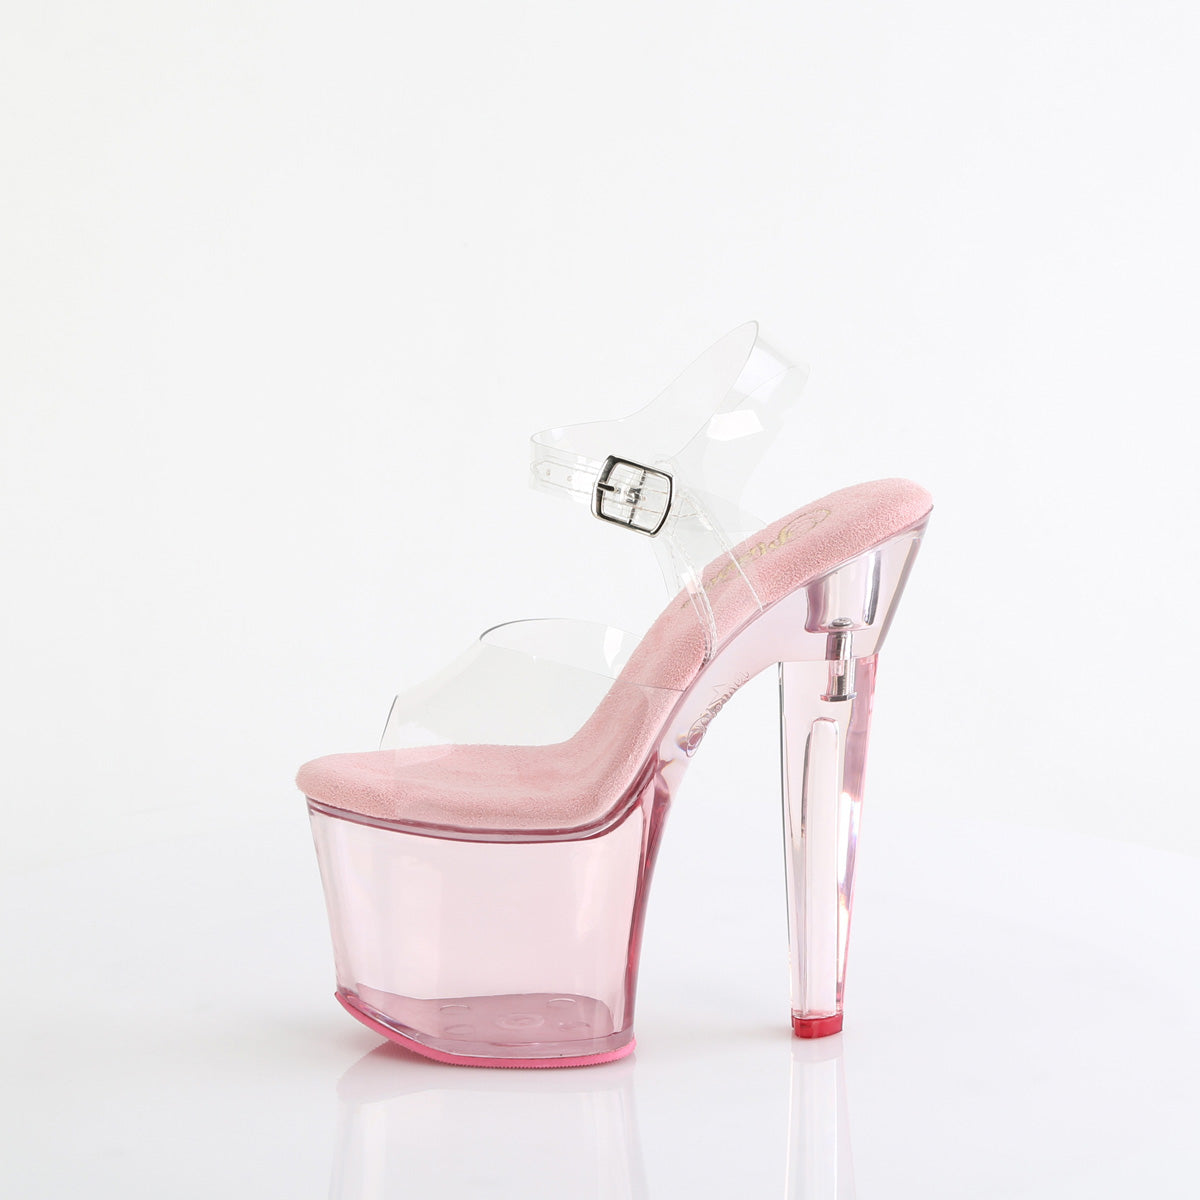 LOVESICK-708T Pleaser Clear/B Pink Tinted Platform Shoes (Sexy Shoes)